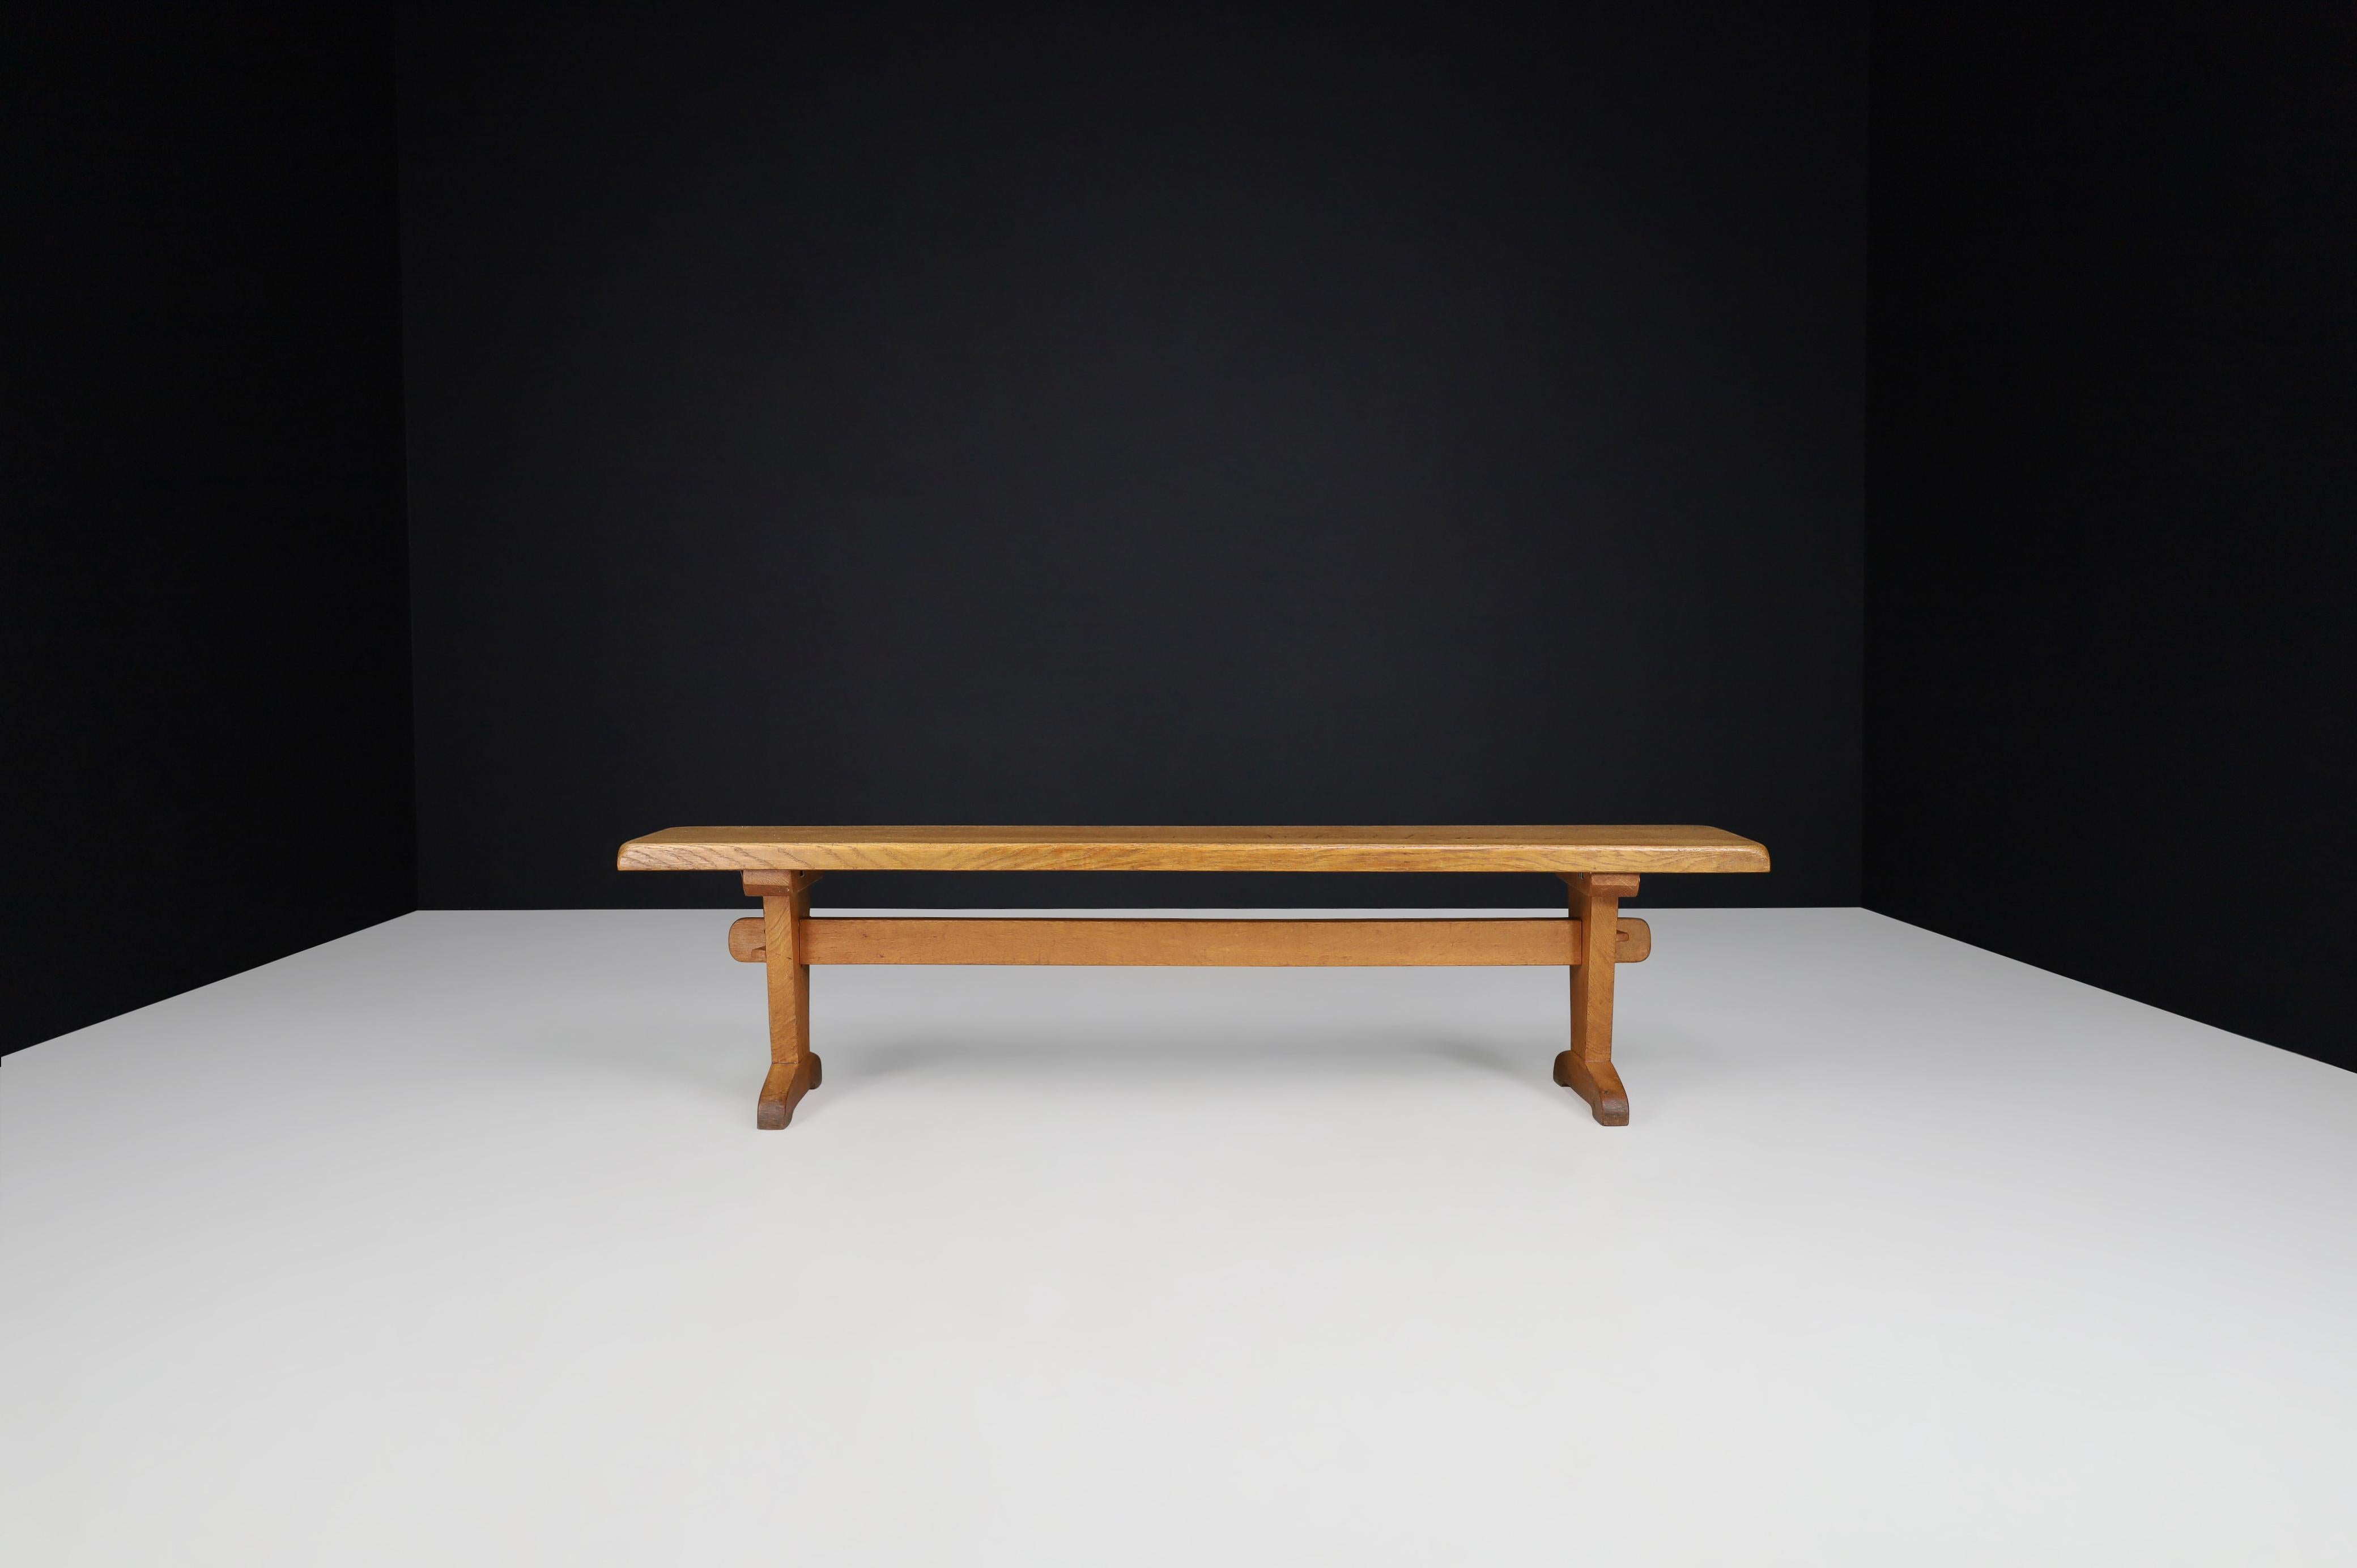 French Brutalist Bench in Blond Oak, France, 1960s For Sale